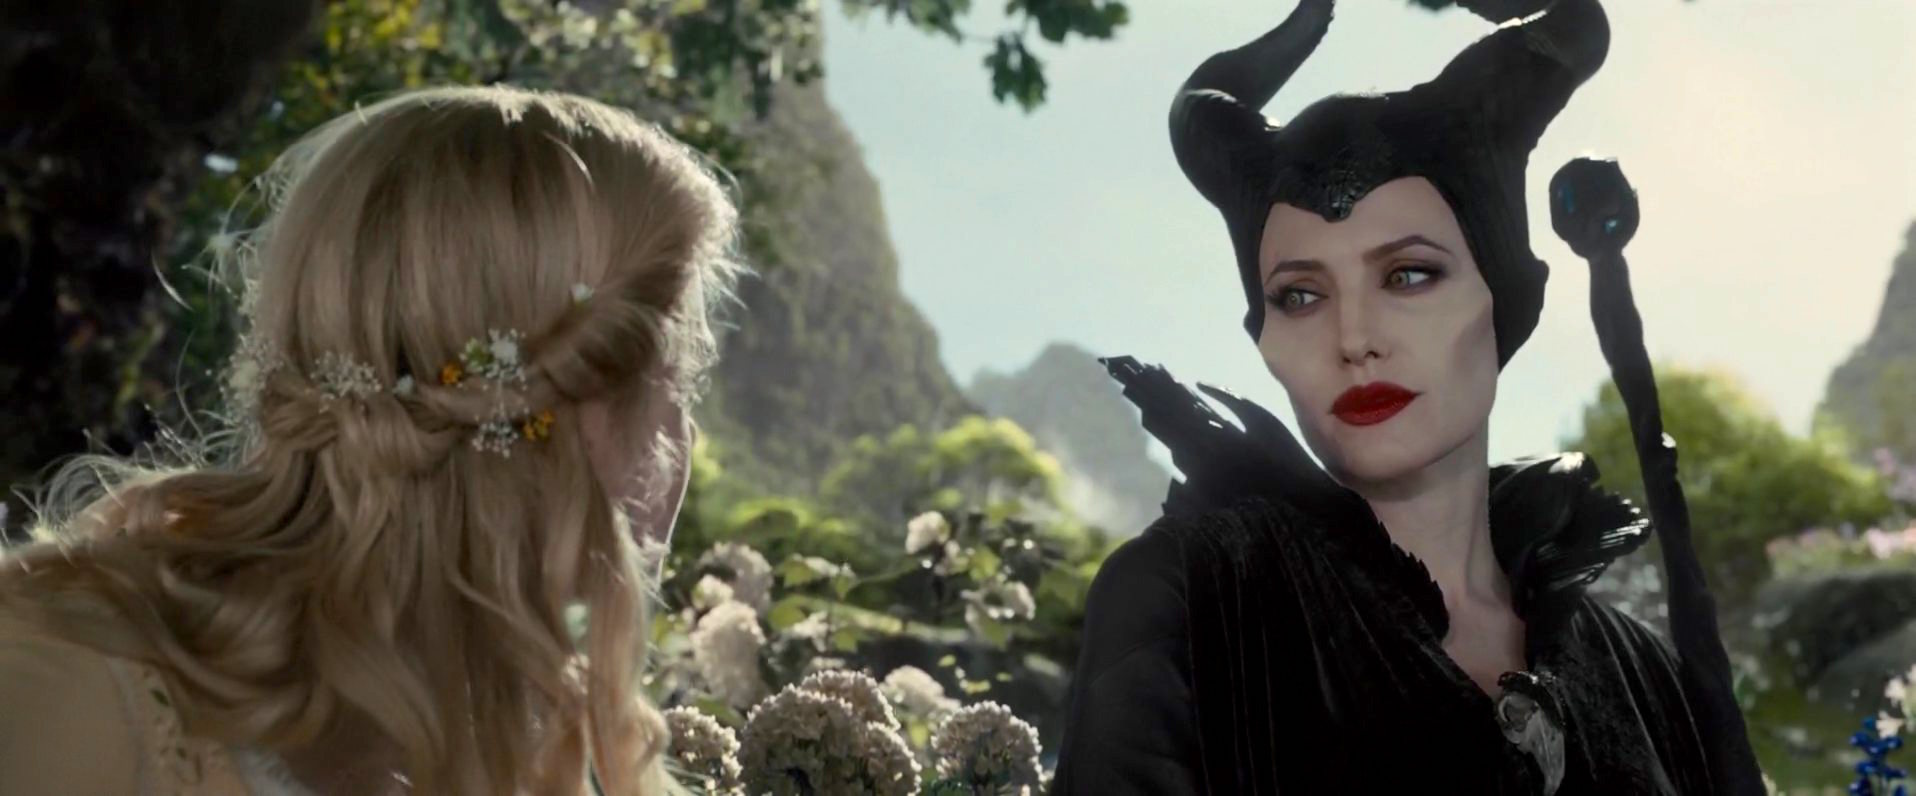 Maleficent - caring